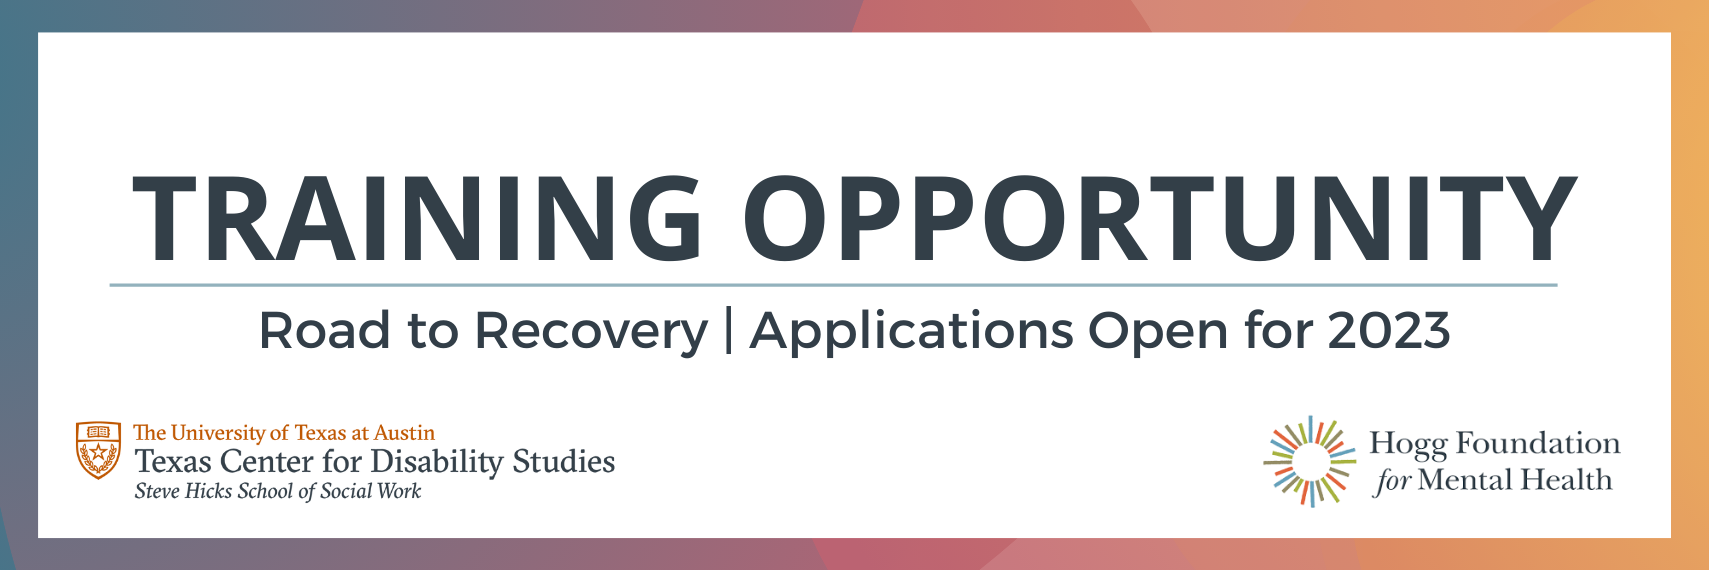 Training Opportunity. Road to Recovery Applications Open for 2023